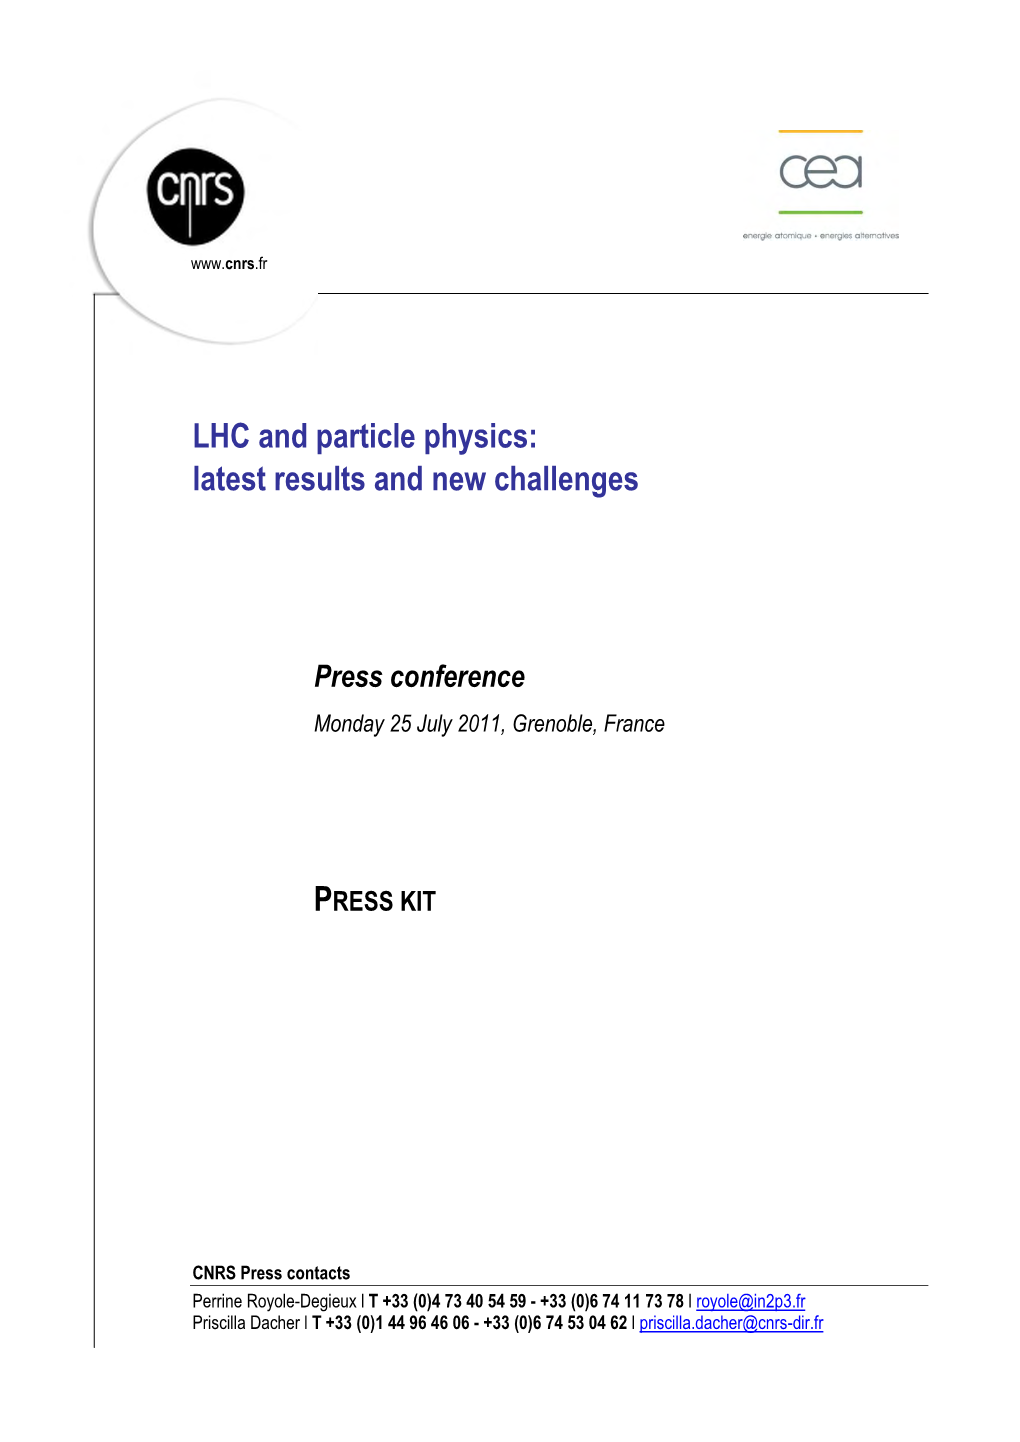 LHC and Particle Physics: Latest Results and New Challenges